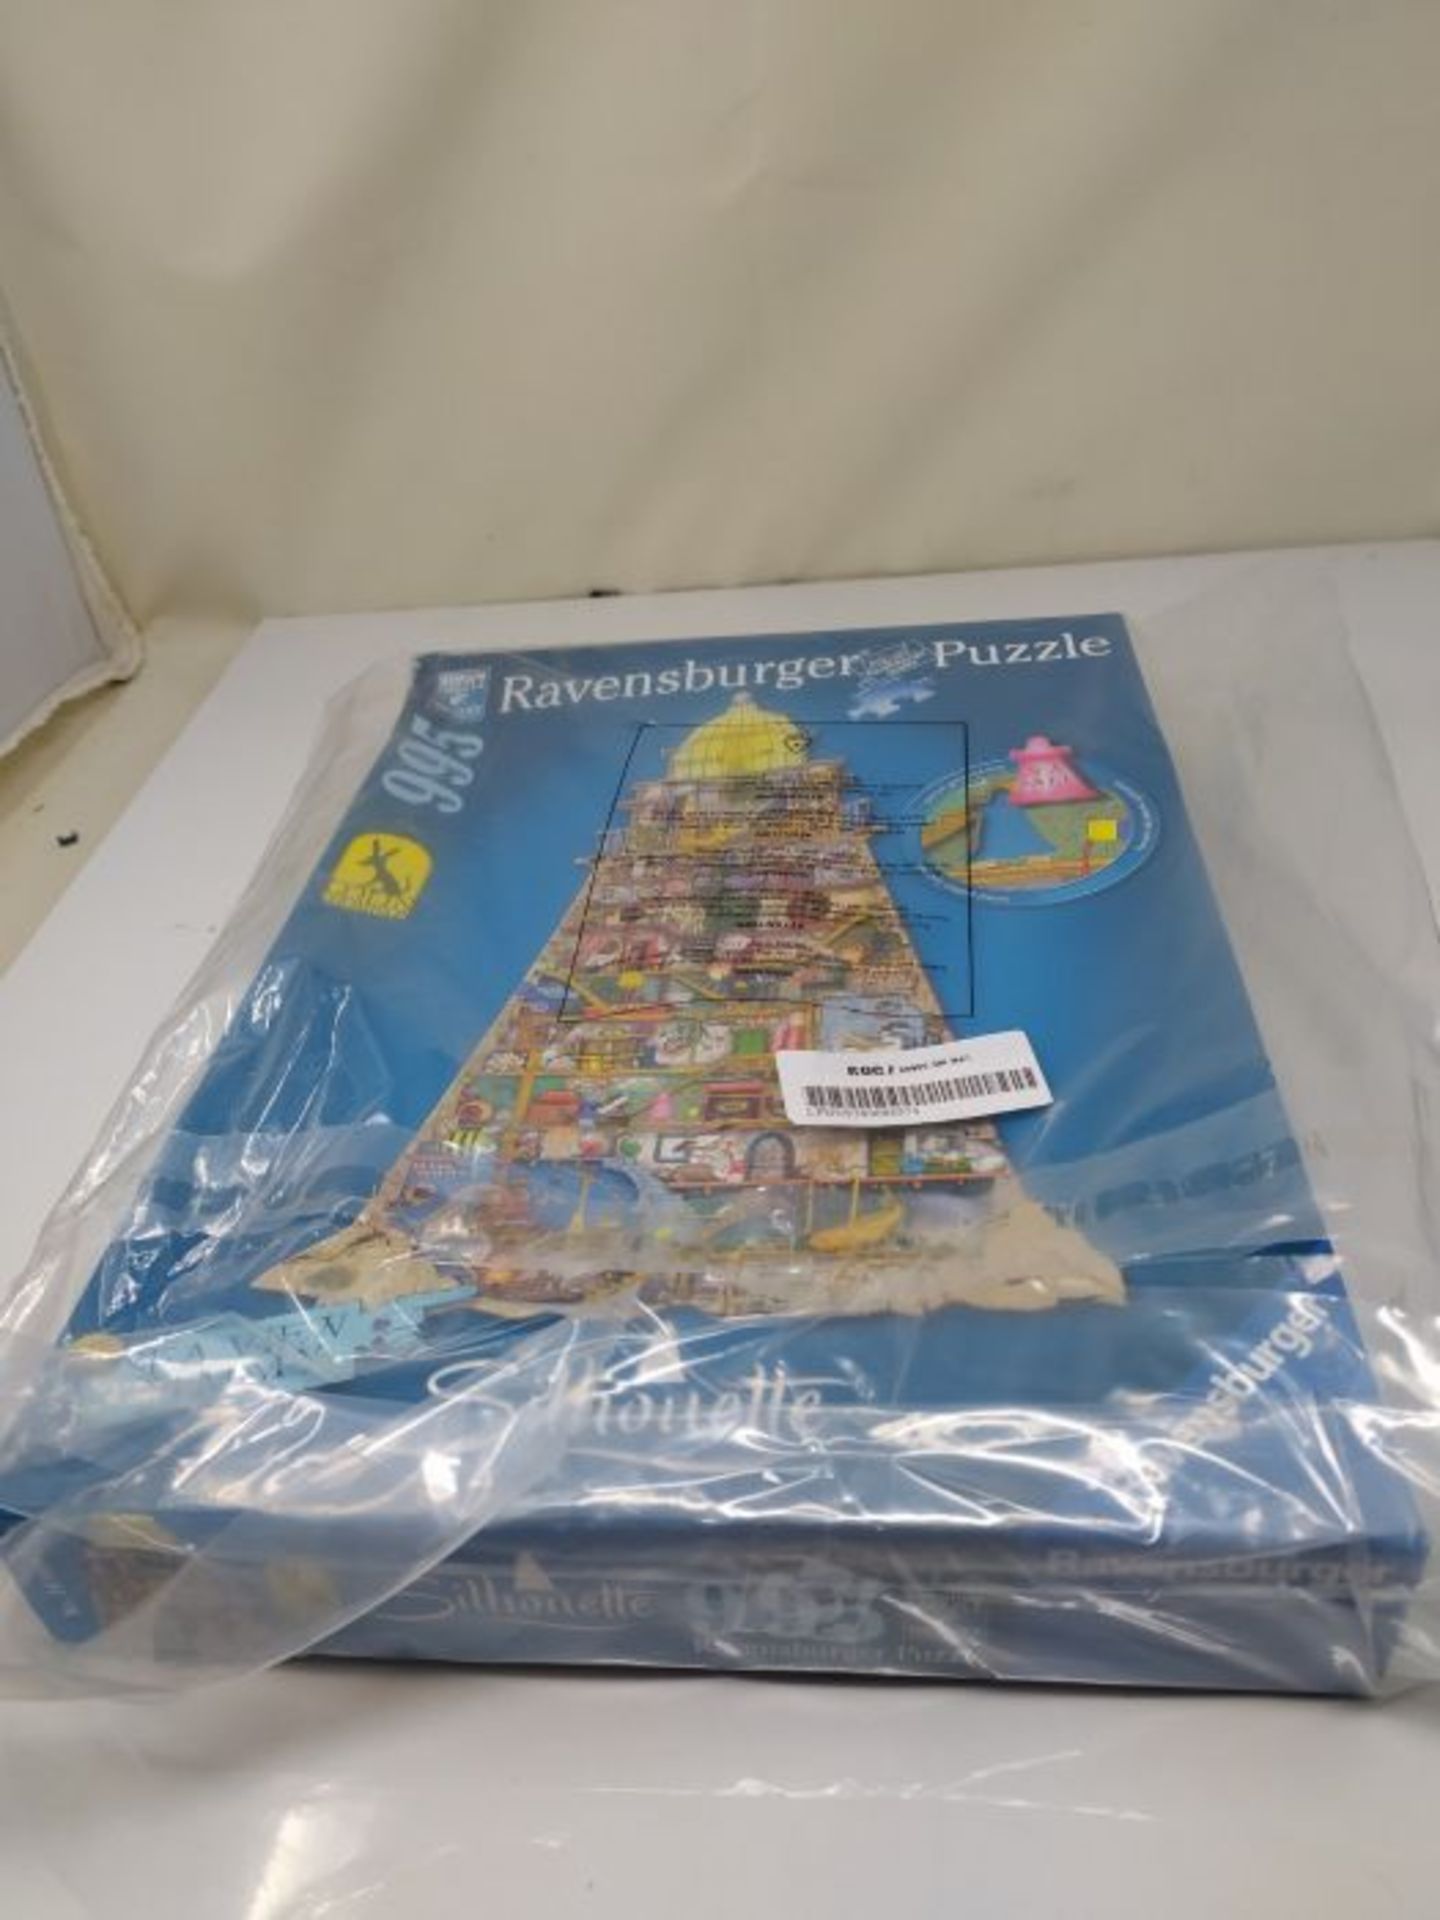 Ravensburger Colin Thompson Lighthouse 955 Piece Shaped Silhouette Jigsaw Puzzle for A - Image 3 of 3